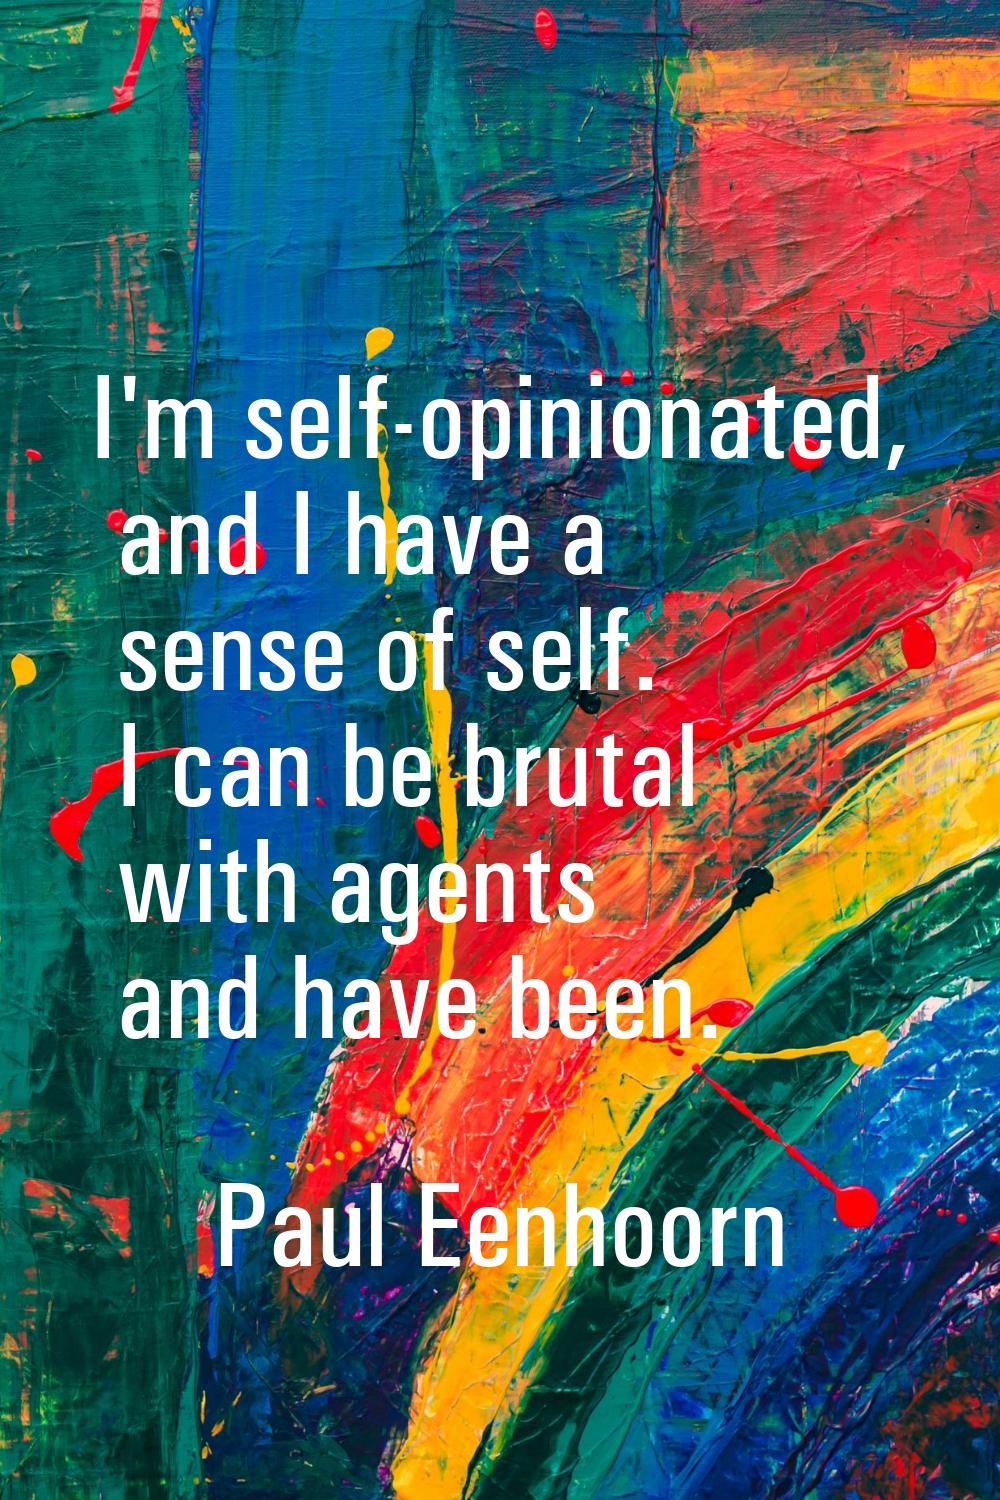 I'm self-opinionated, and I have a sense of self. I can be brutal with agents and have been.